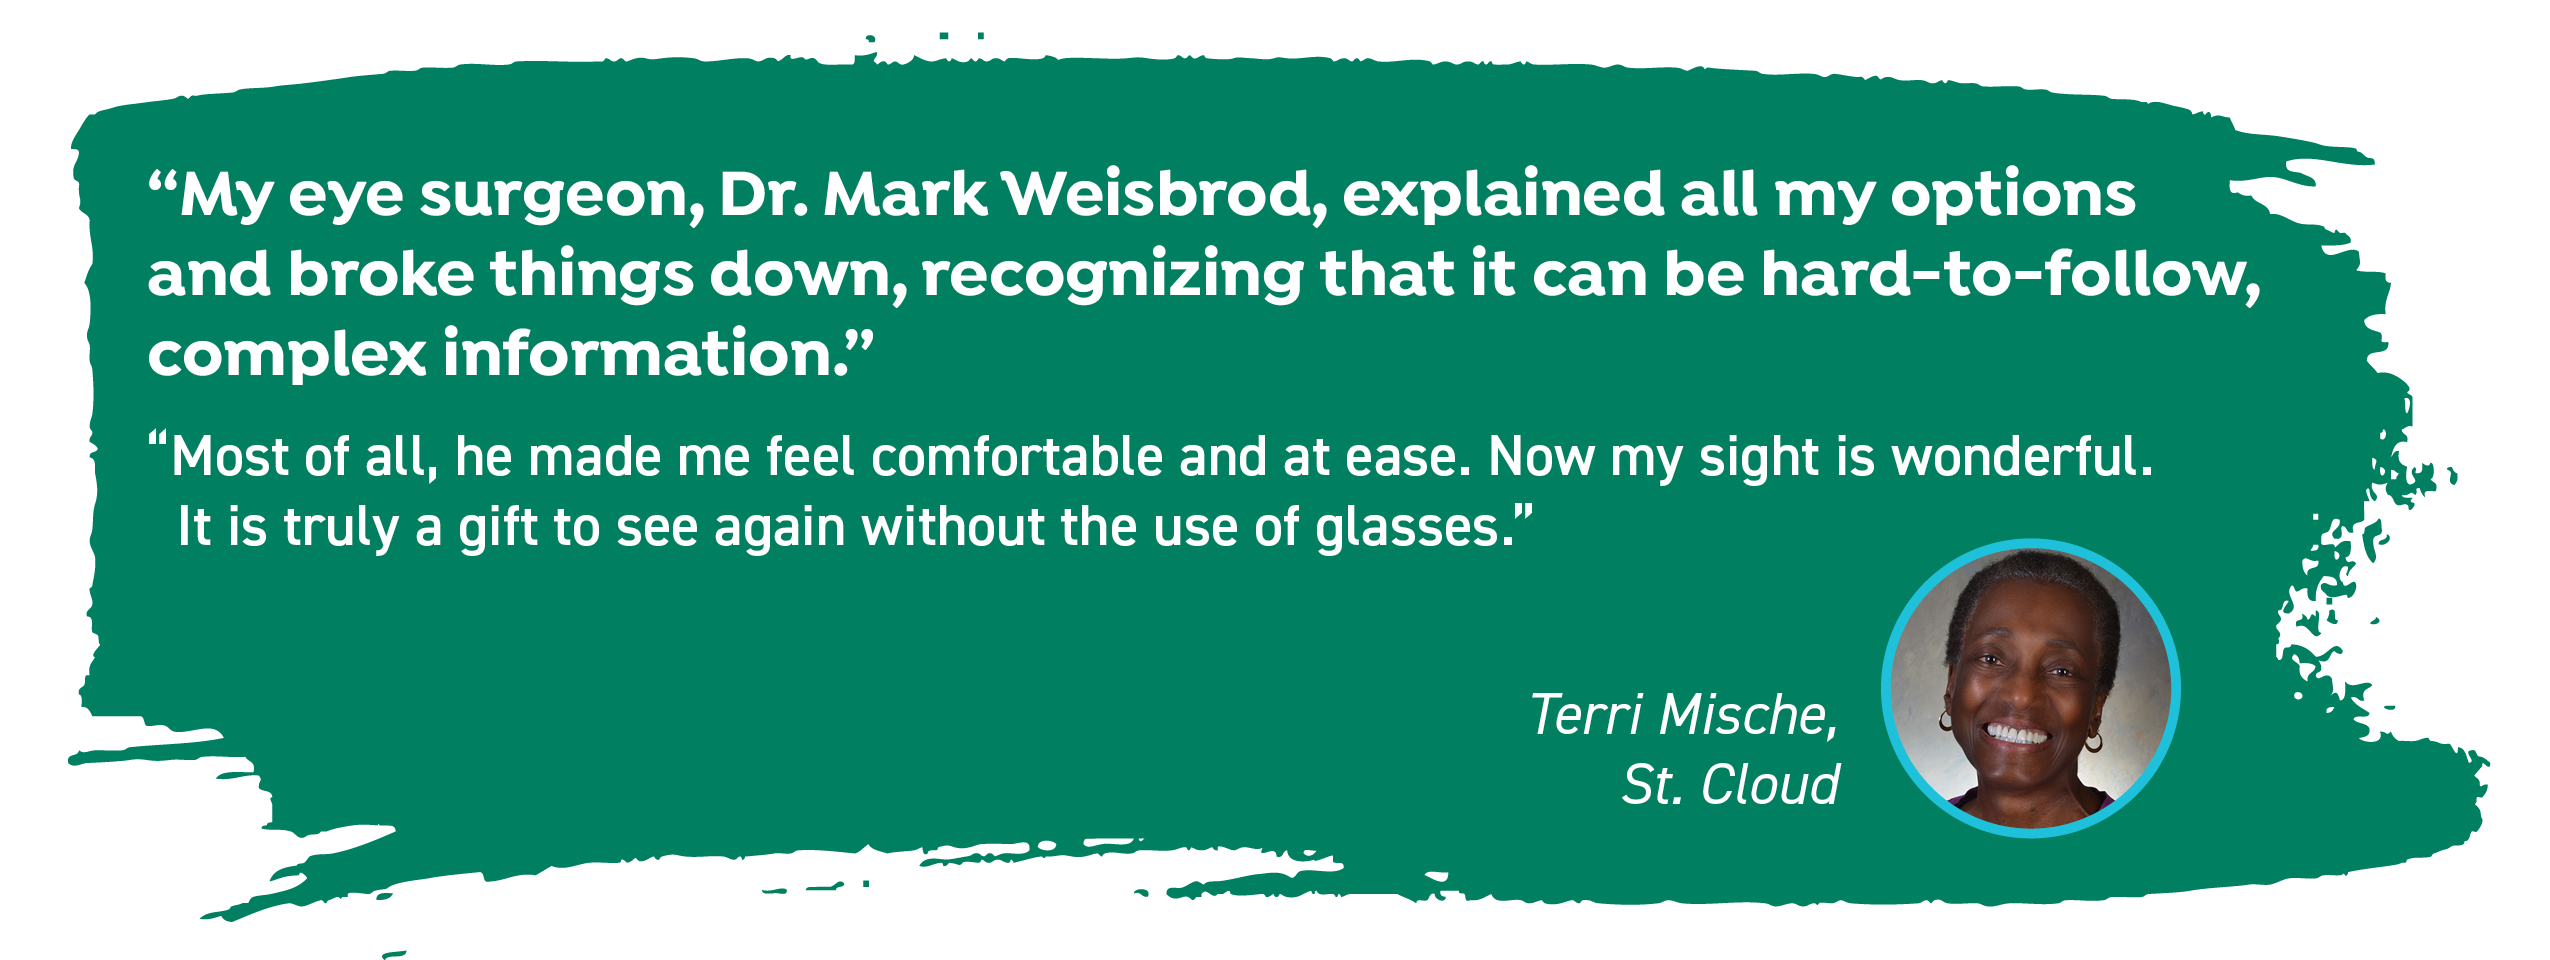 Terri Mische of St. Cloud says, "My eye surgeon, Dr. Mark Weisbrod, explained all my options and broke things down, recognizing that it can be hard-to-follow, complex information. Most of all, he made me feel comfortable and at ease. Now my sight is wonderful. It is truly a gift to see again without the use of glasses."